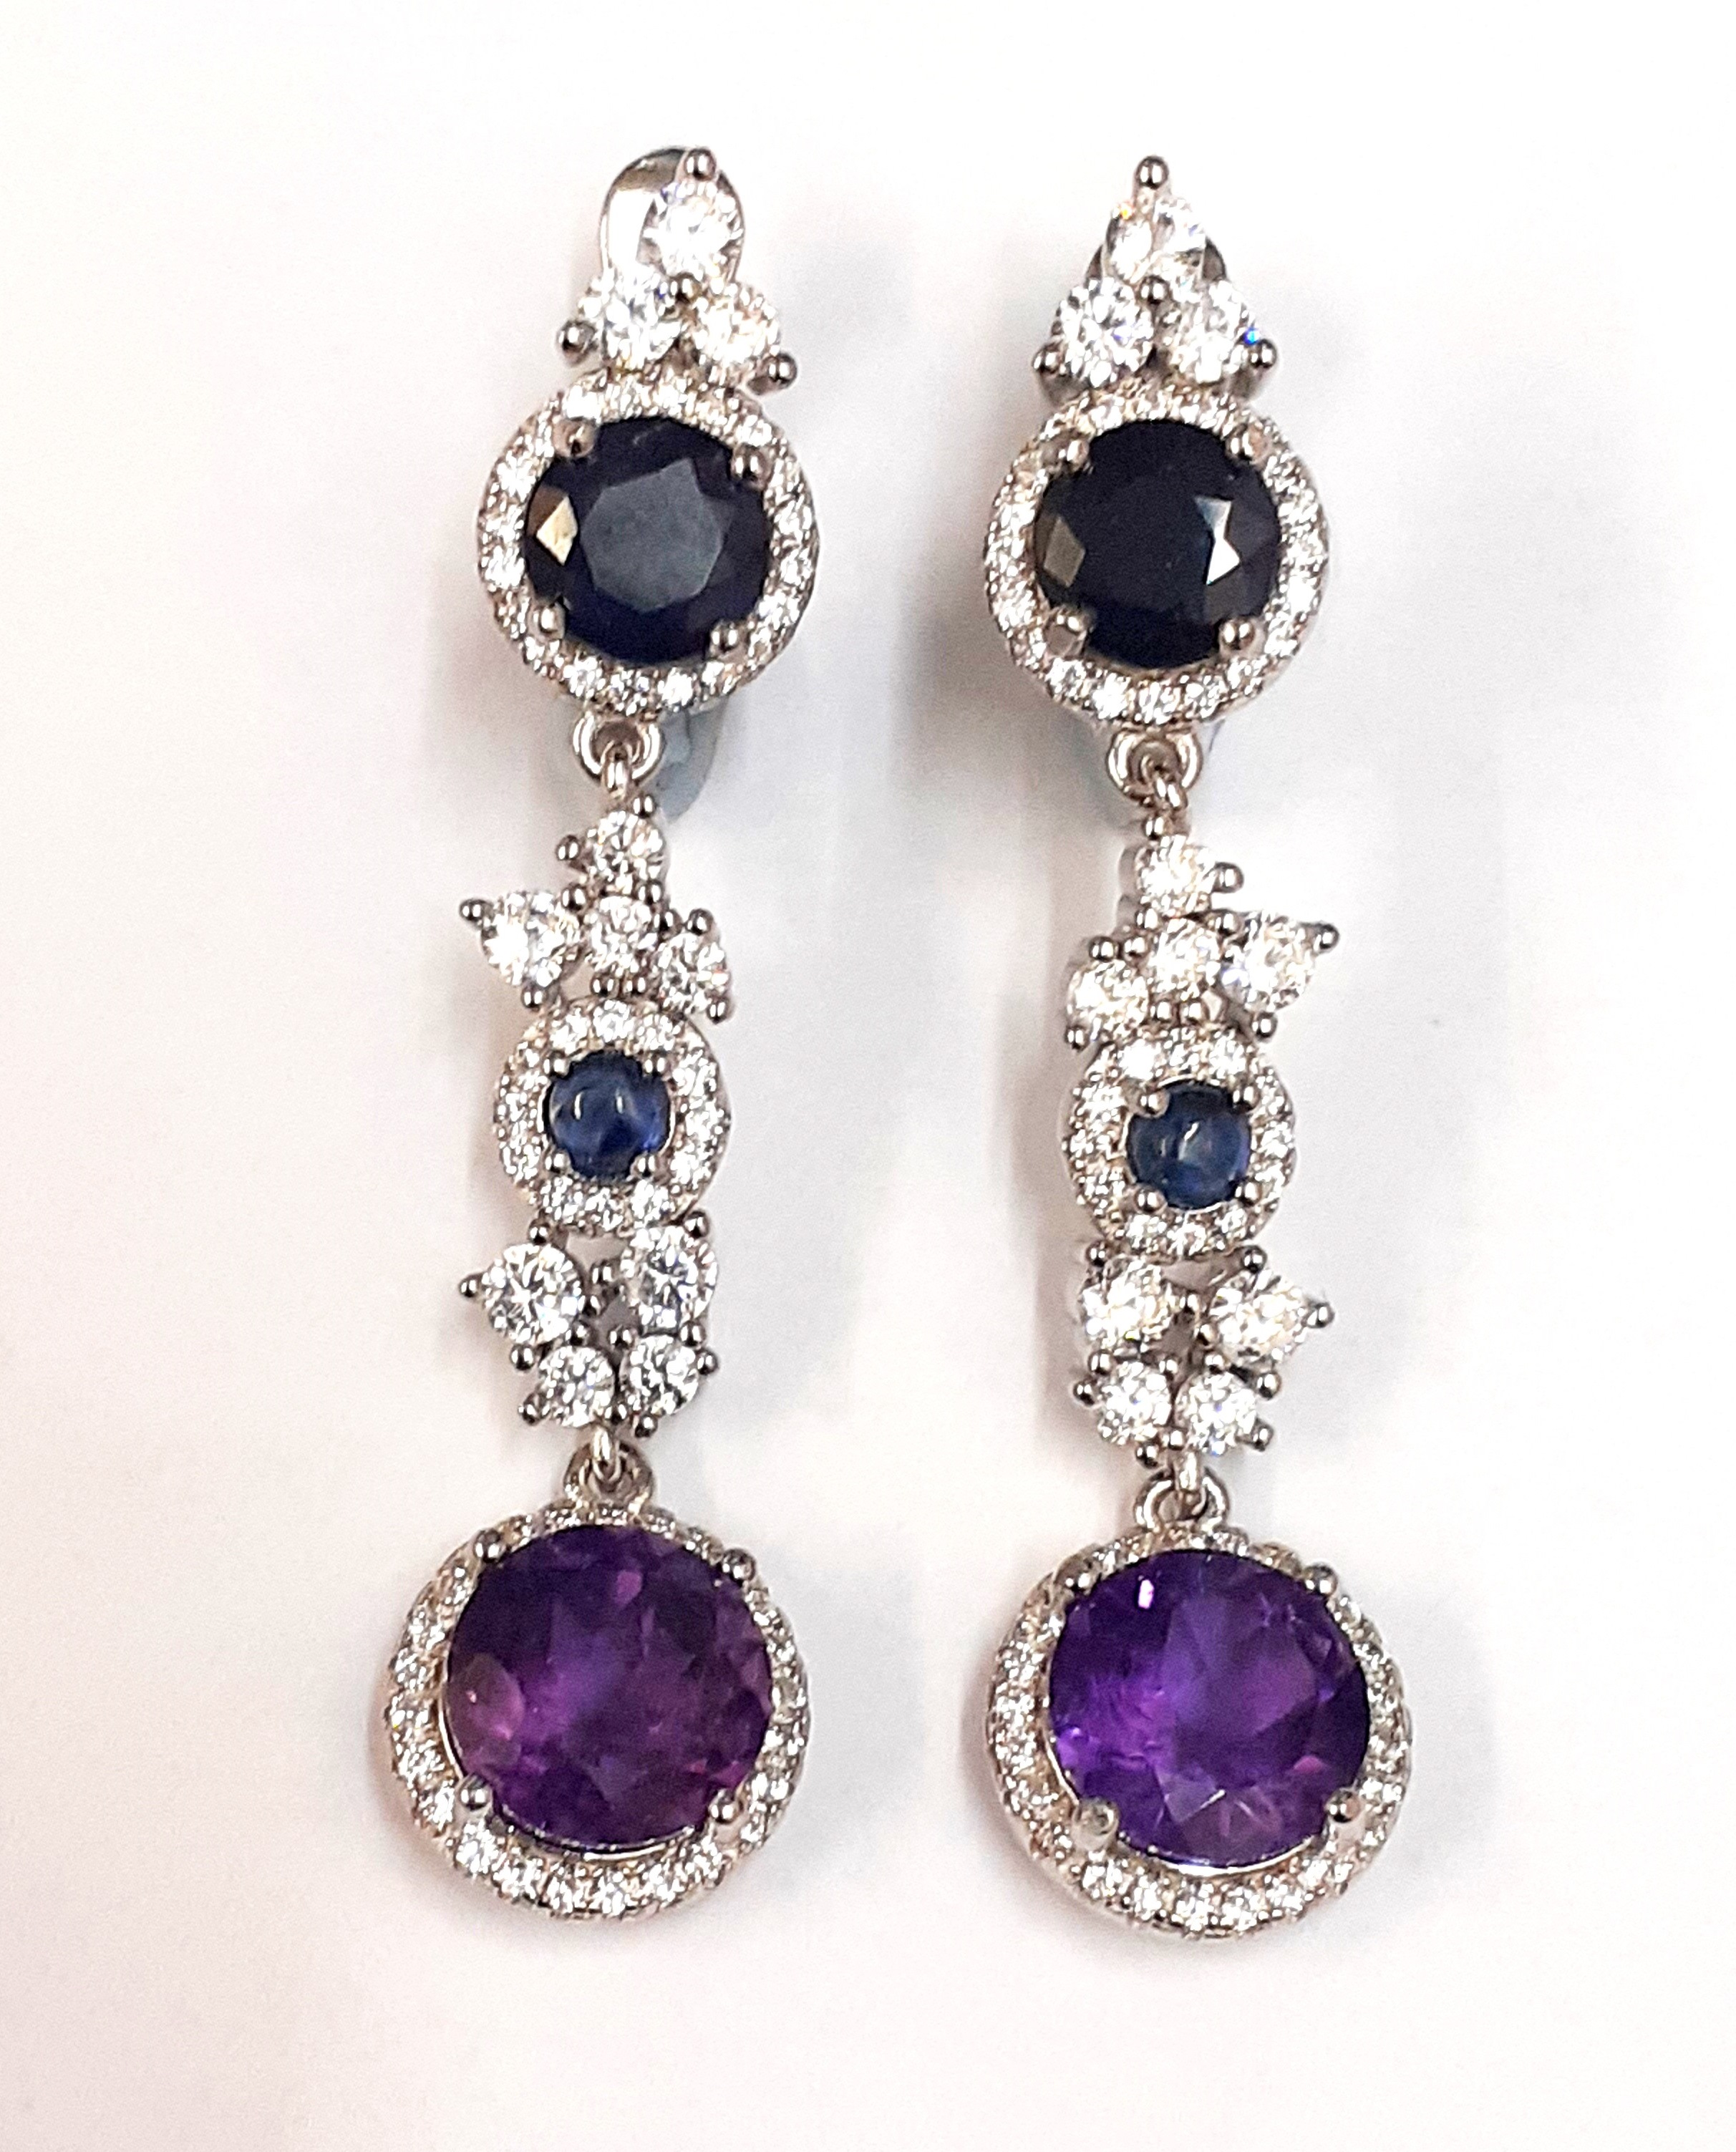 A pair of 925 silver drop earrings set with amethyst, sapphires and white stones, L. 4.8cm.